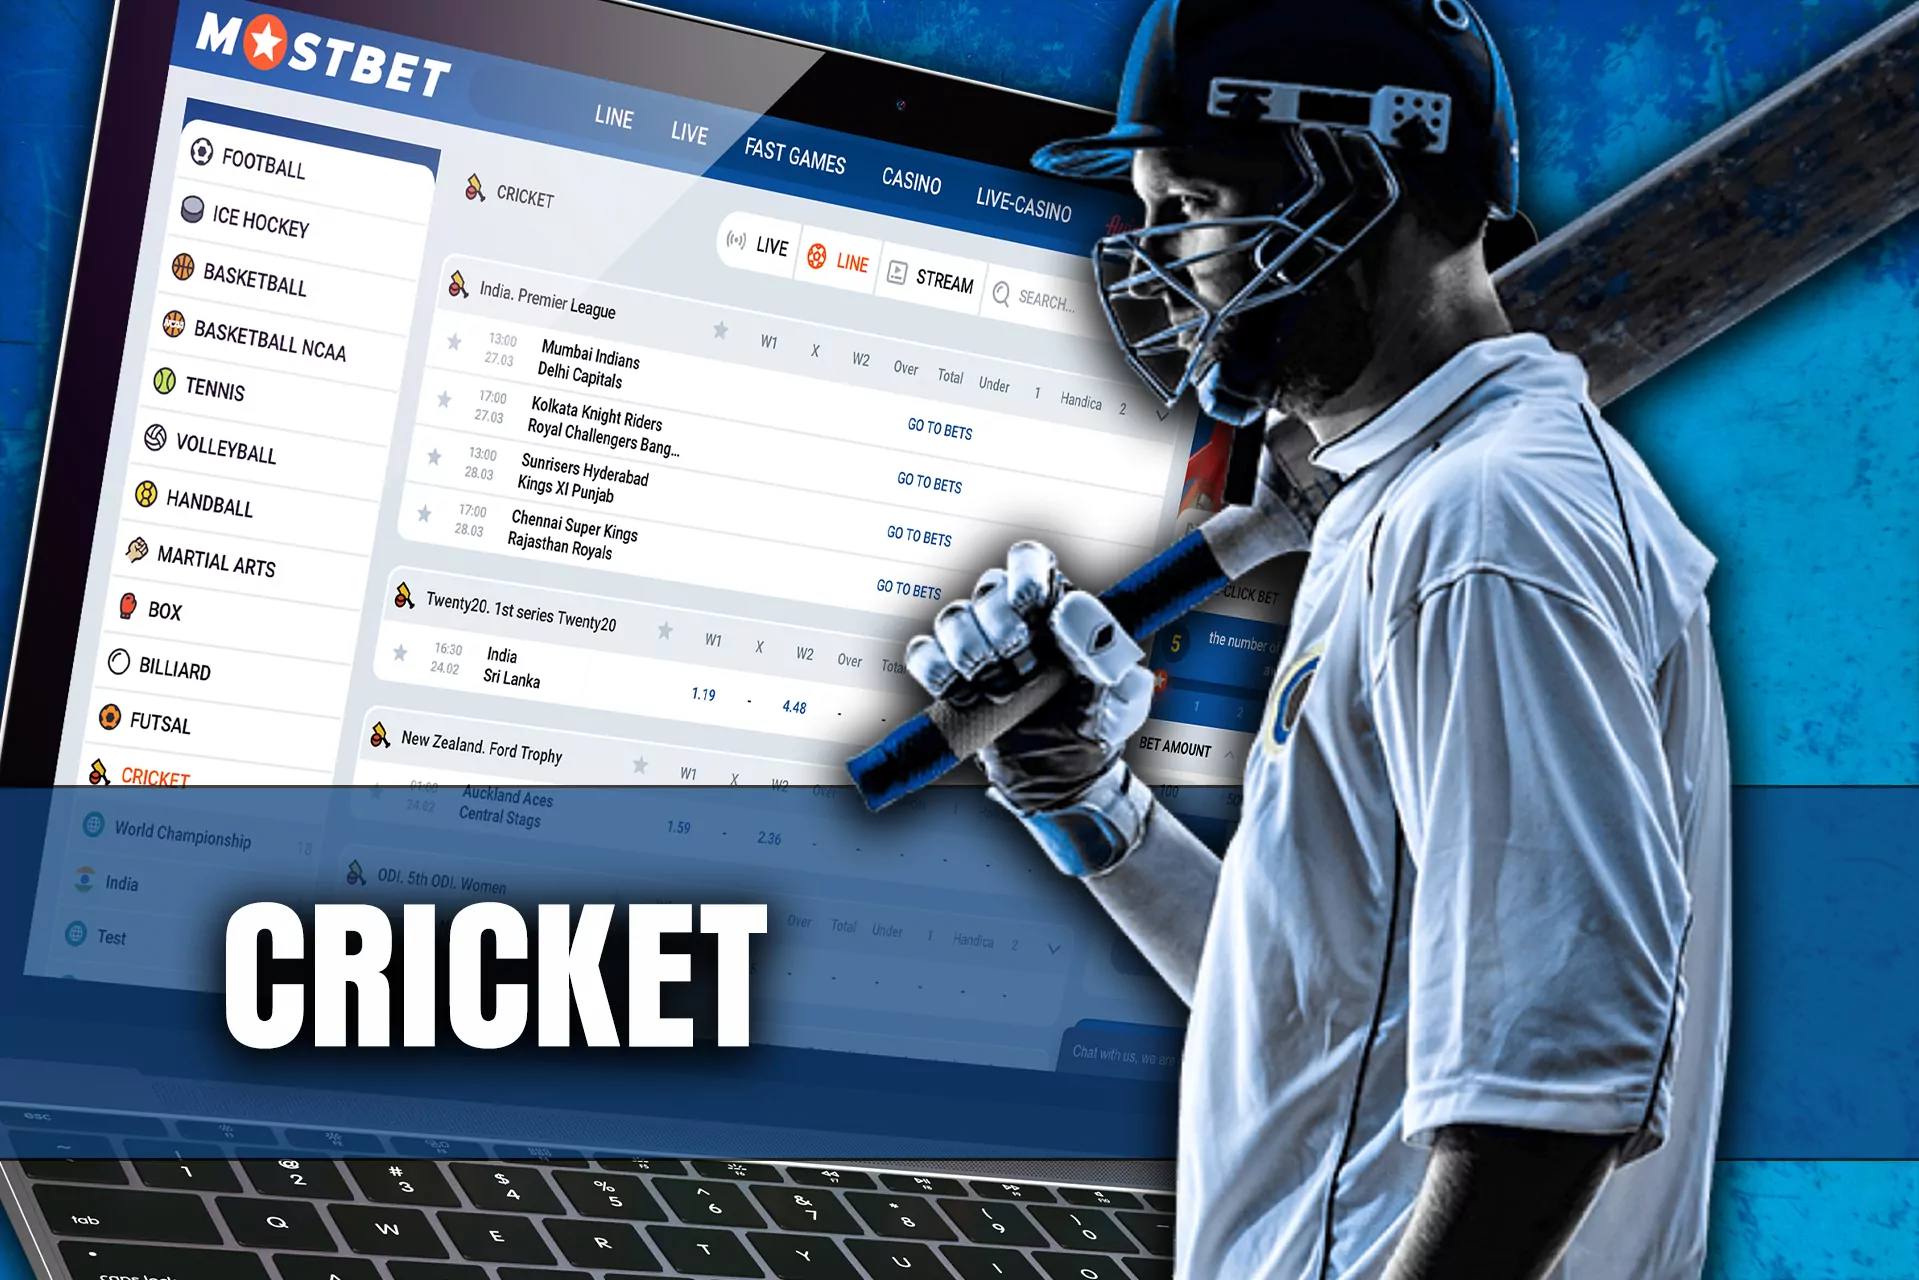 Mostbet cricket betting site gives 100% welcome bonus up to 25,000 BDT for new players.